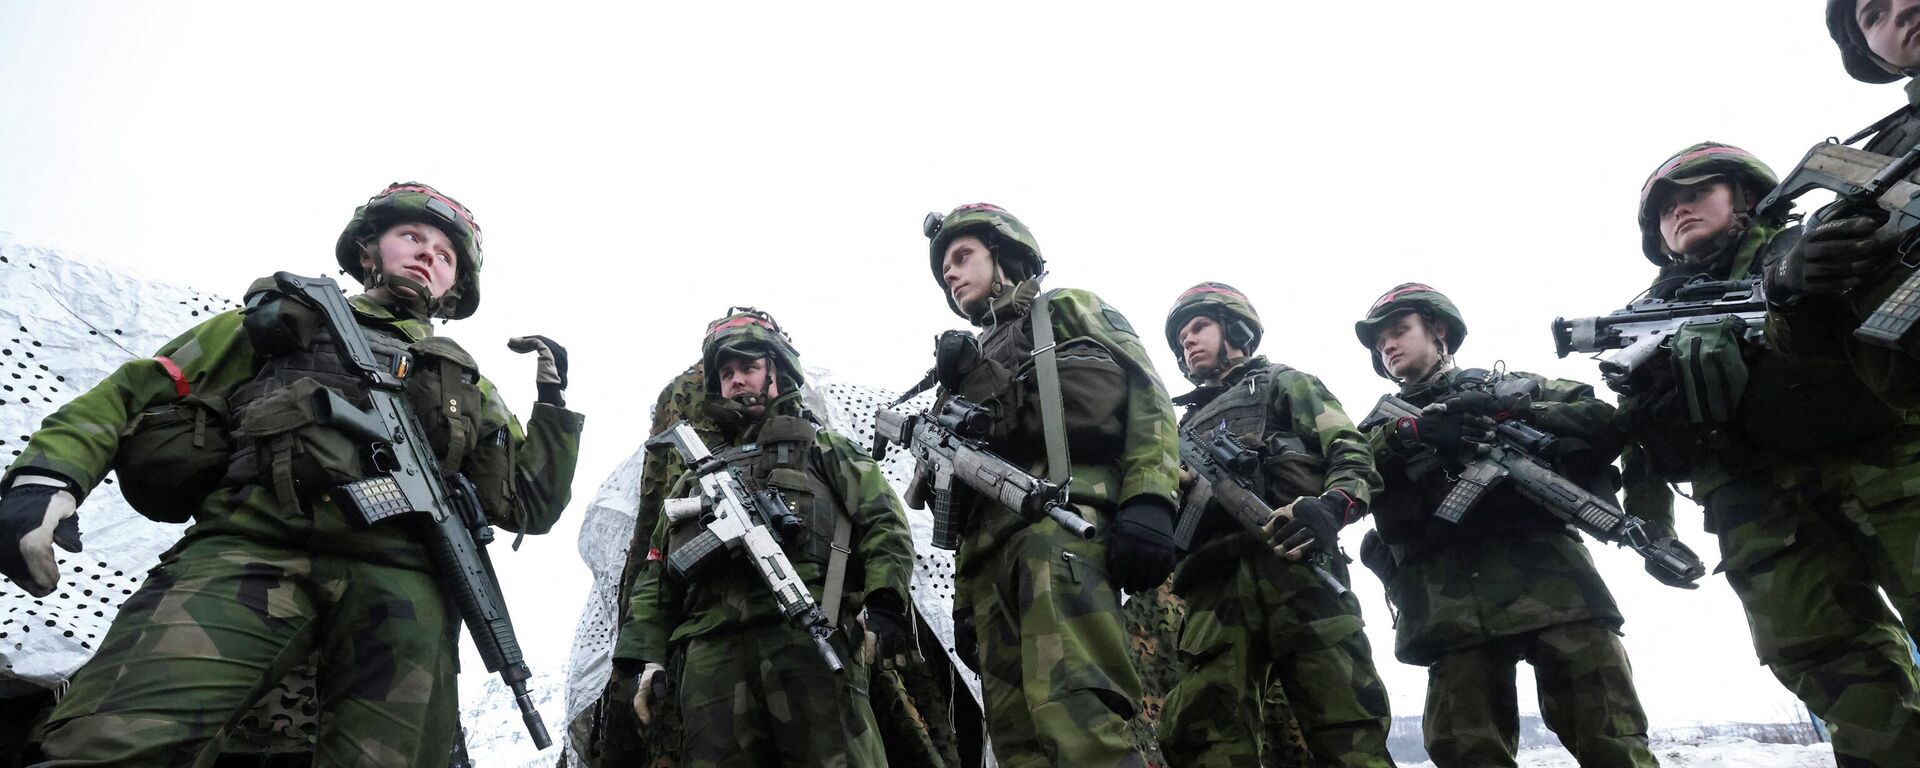 Swedish soldiers take part in a military exercise called Cold Response 2022, gathering around 30,000 troops from NATO member countries plus Finland and Sweden, amid Russia's invasion of Ukraine, in Evenes, Norway, March 22, 2022.  - Sputnik International, 1920, 16.04.2022